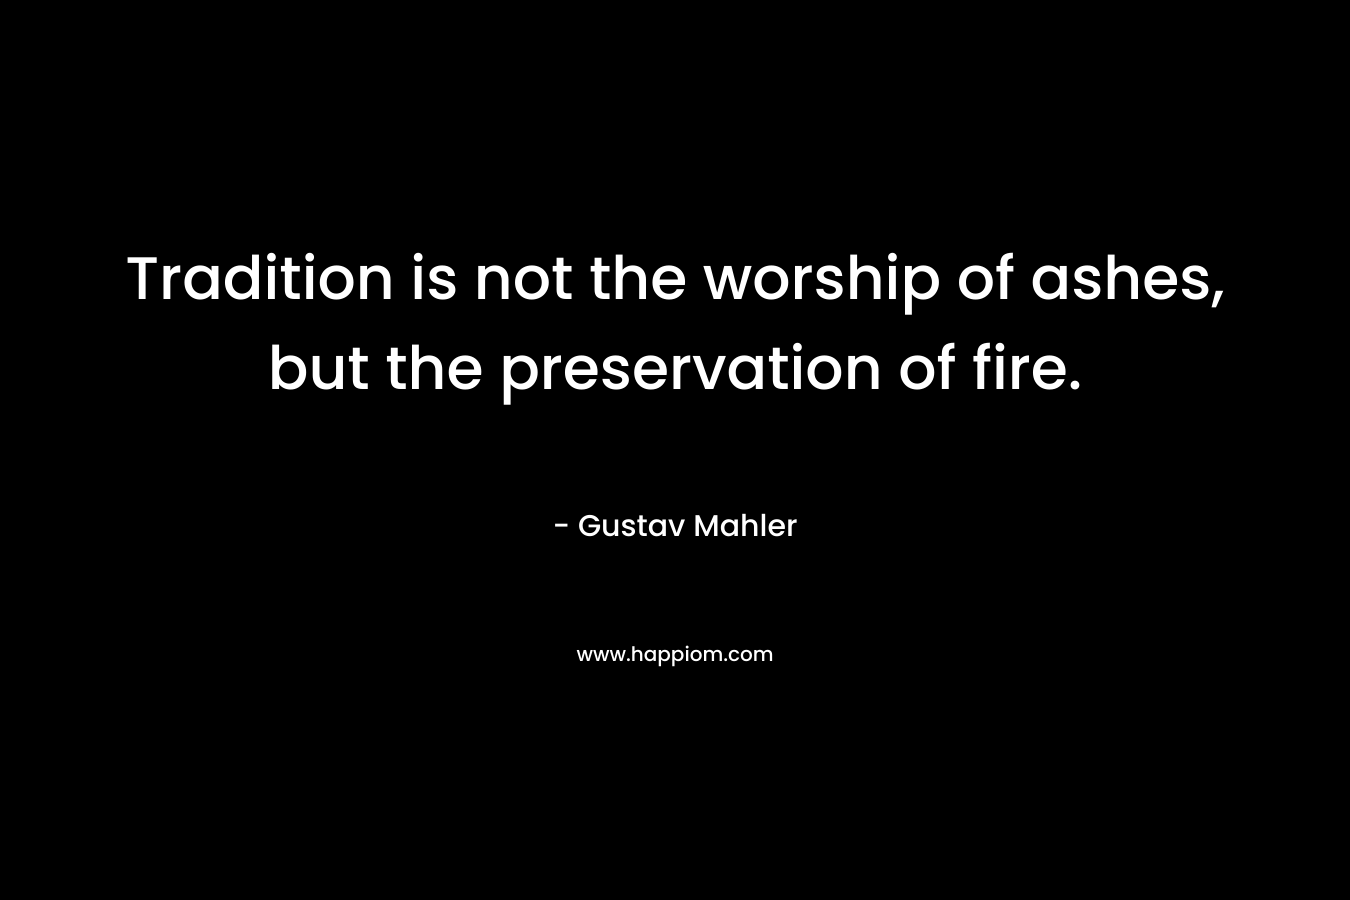 Tradition is not the worship of ashes, but the preservation of fire. – Gustav Mahler